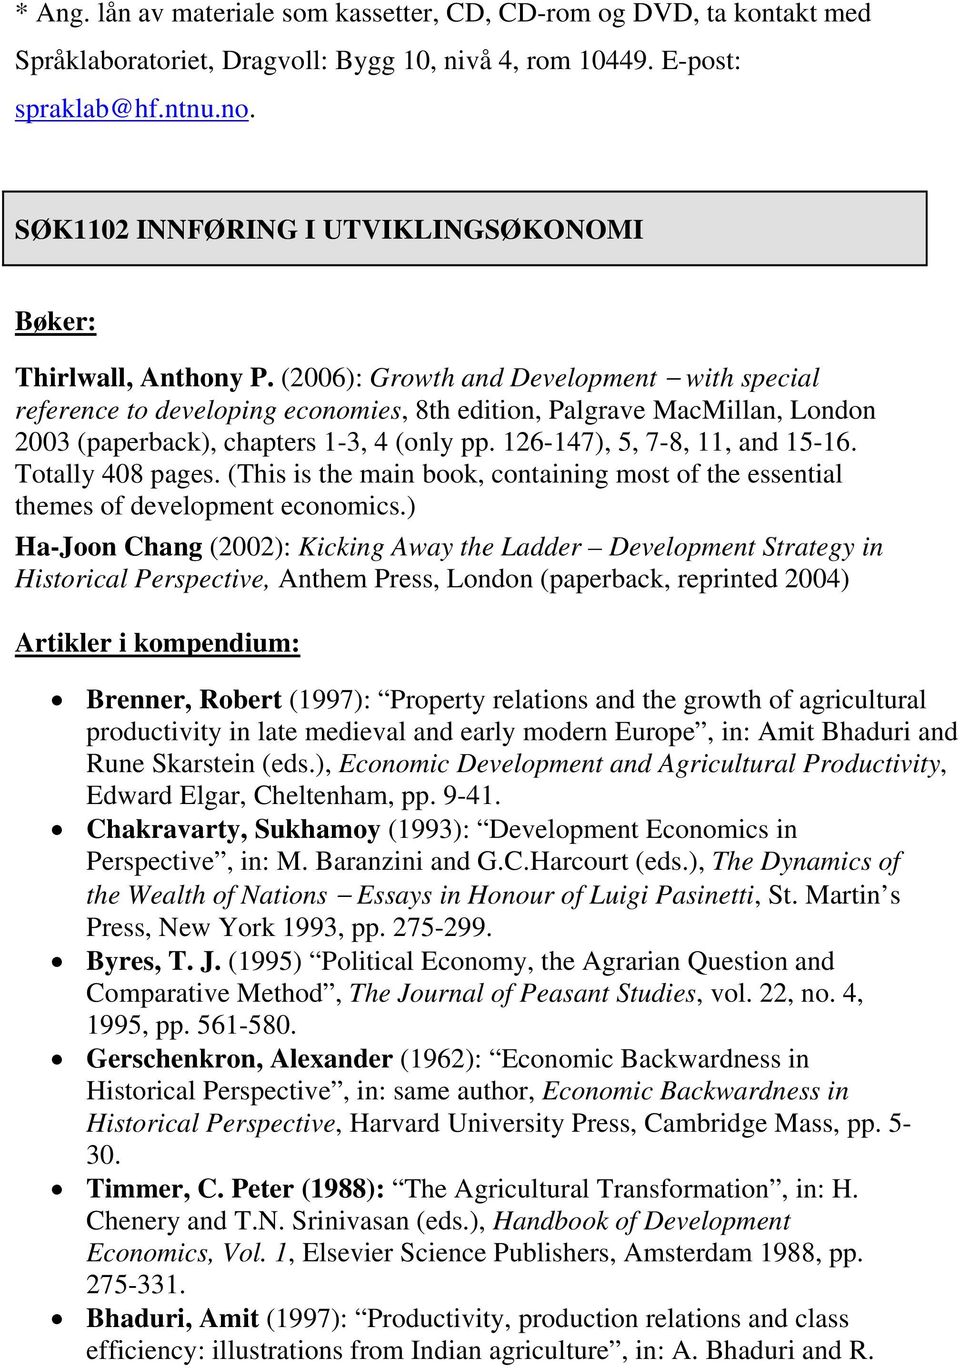 (2006): Growth and Development with special reference to developing economies, 8th edition, Palgrave MacMillan, London 2003 (paperback), chapters 1-3, 4 (only pp. 126-147), 5, 7-8, 11, and 15-16.